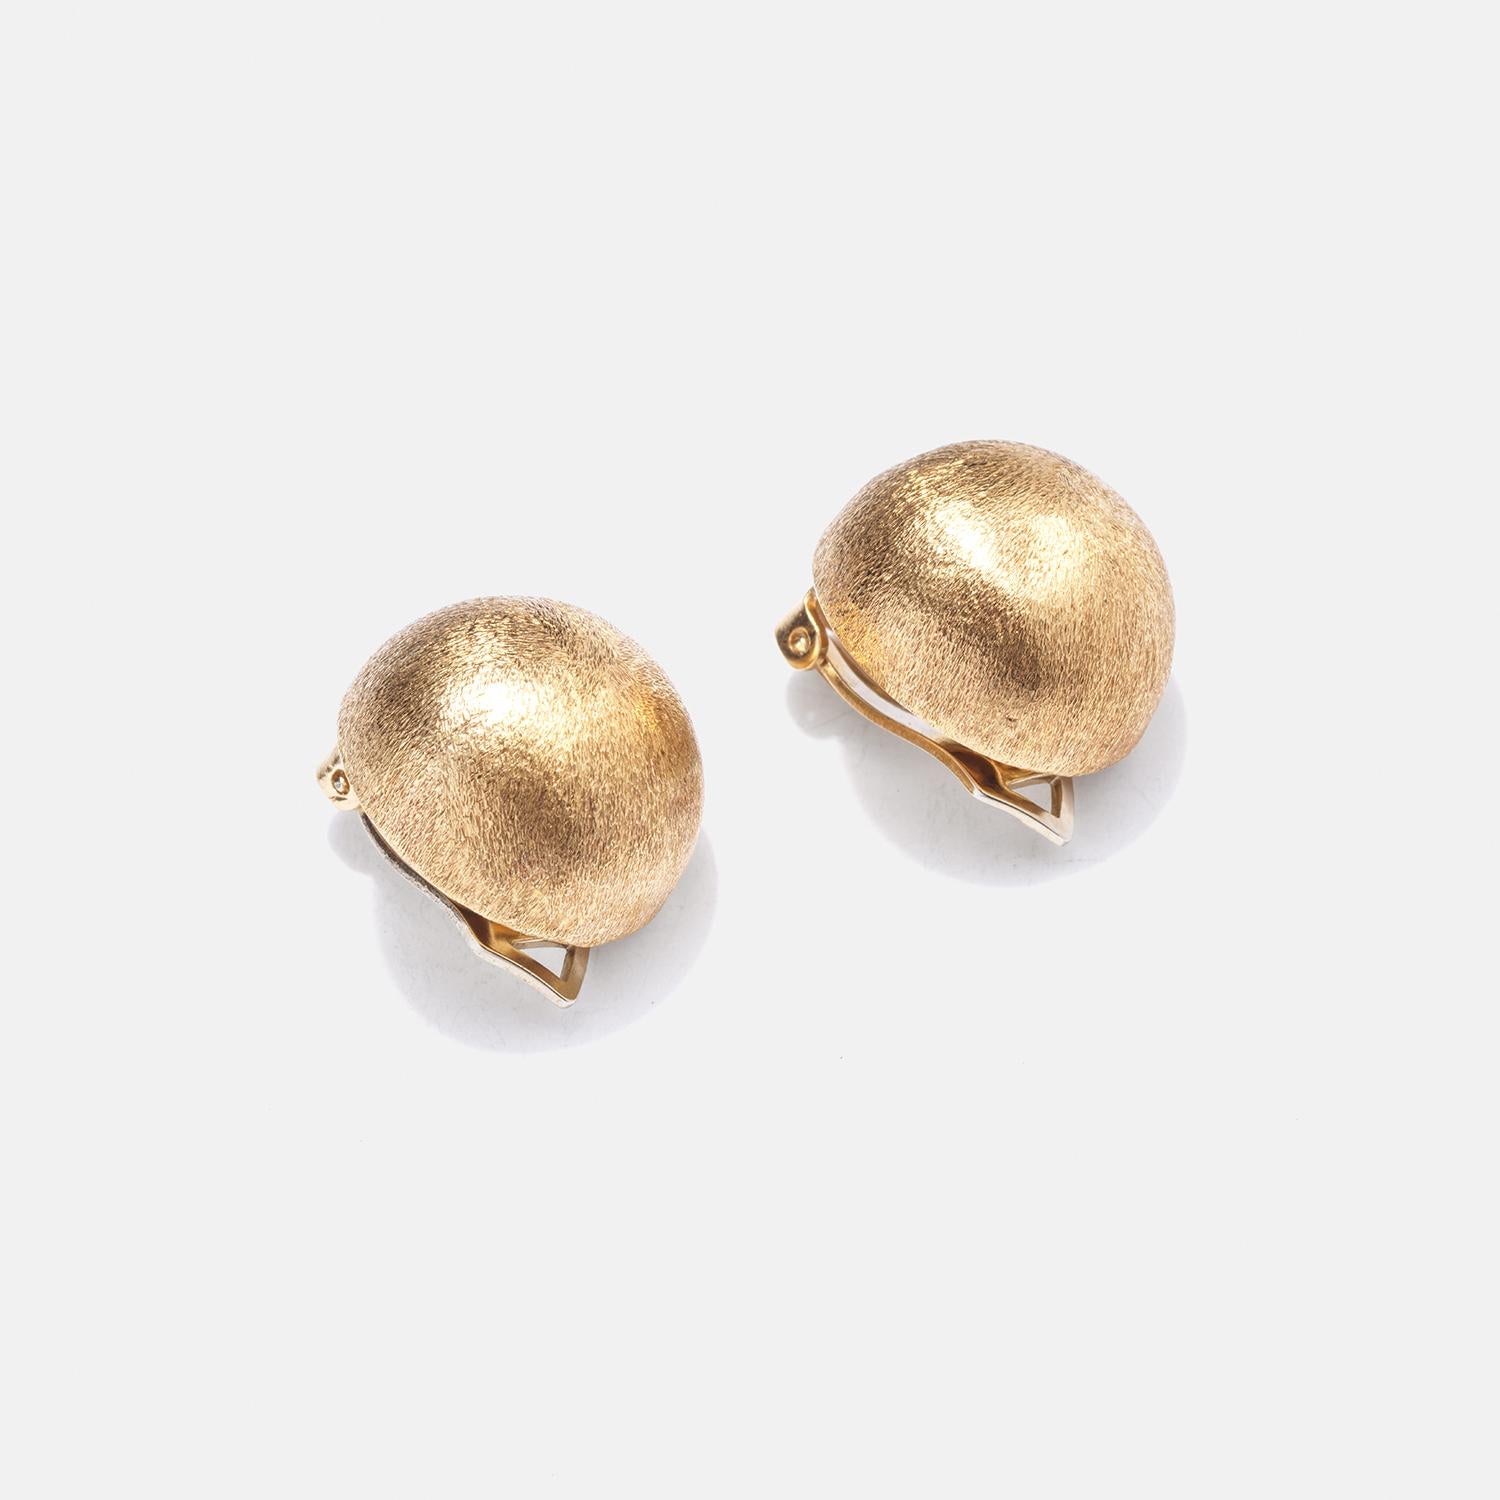 These 18 karat gold clip-on earrings feature a distinctive dome shape, presenting a subtle but appealing volumetric form. Their surface is finished with a matte, brushed texture that softens the gold's natural sheen, adding a contemporary touch to